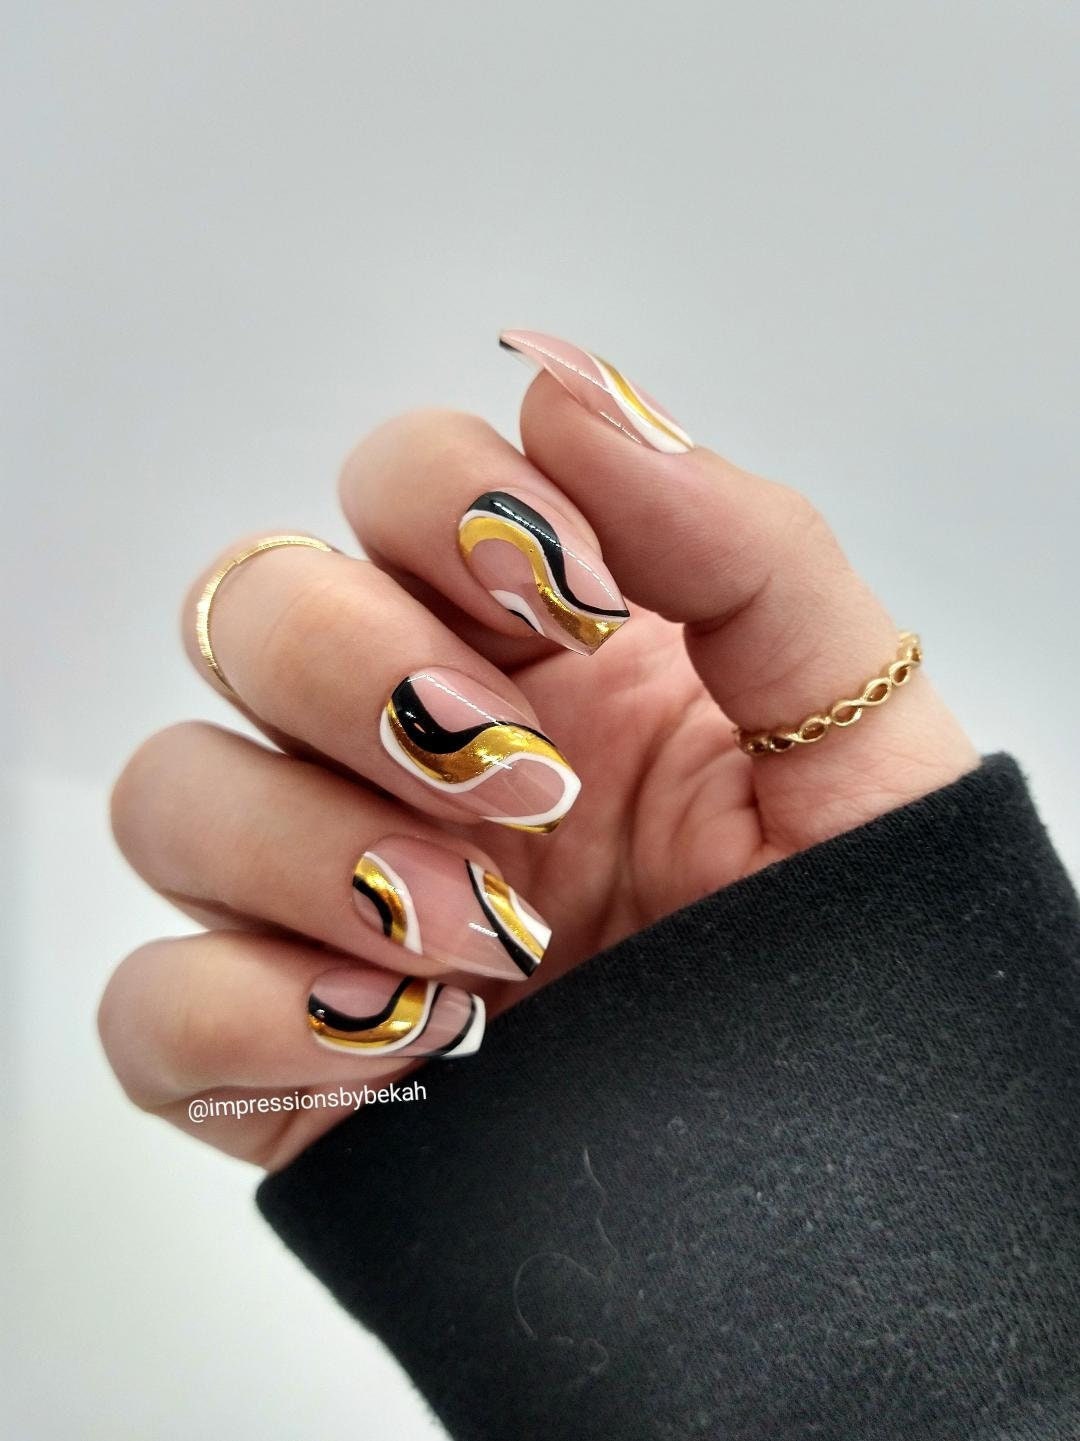 57 Pretty Nail Ideas The Nail Art Everyone's Loving – White and gold